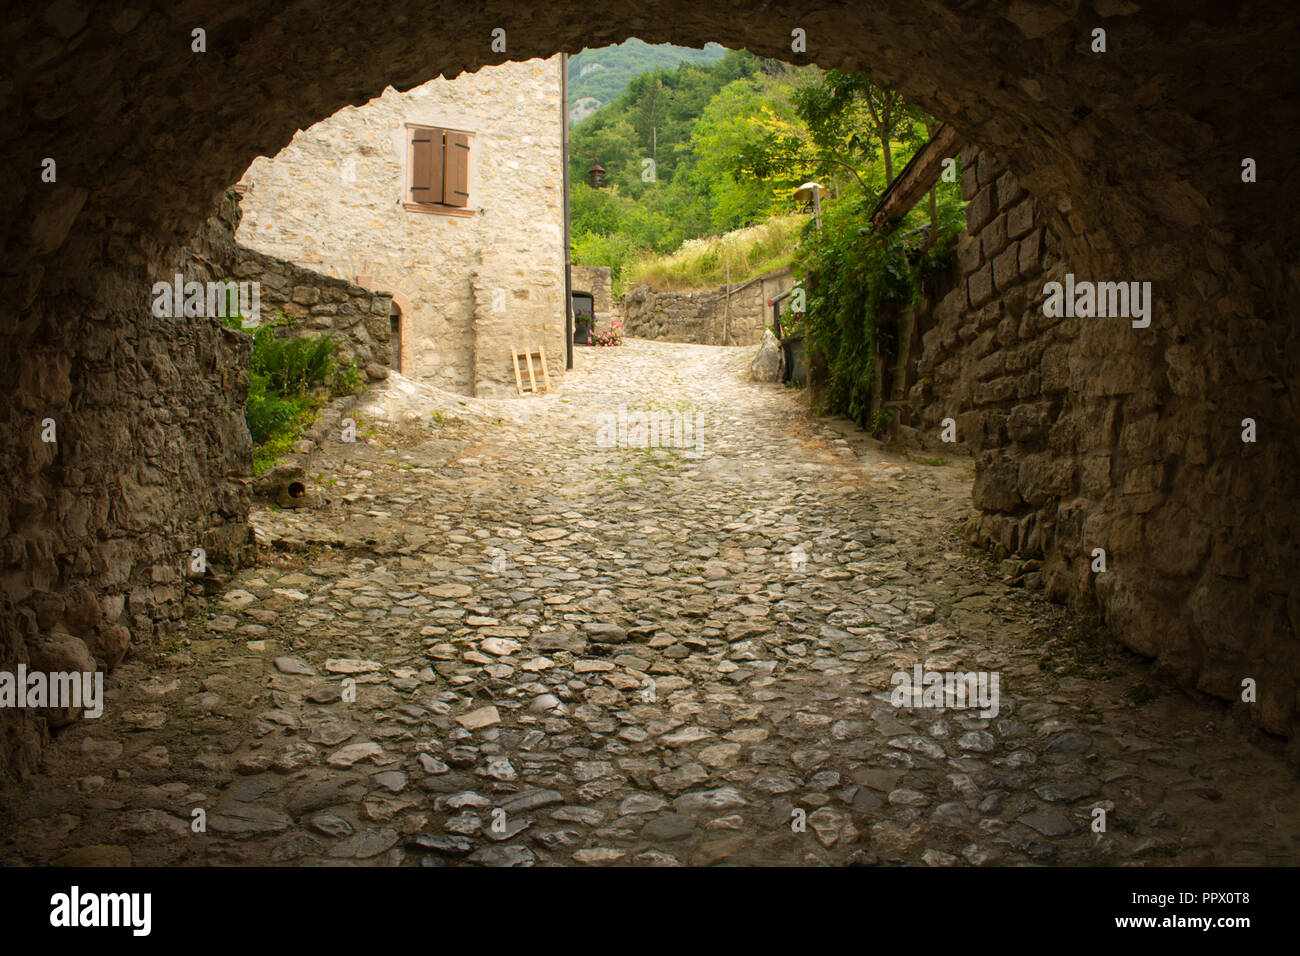 arch in the old medieval village Stock Photo